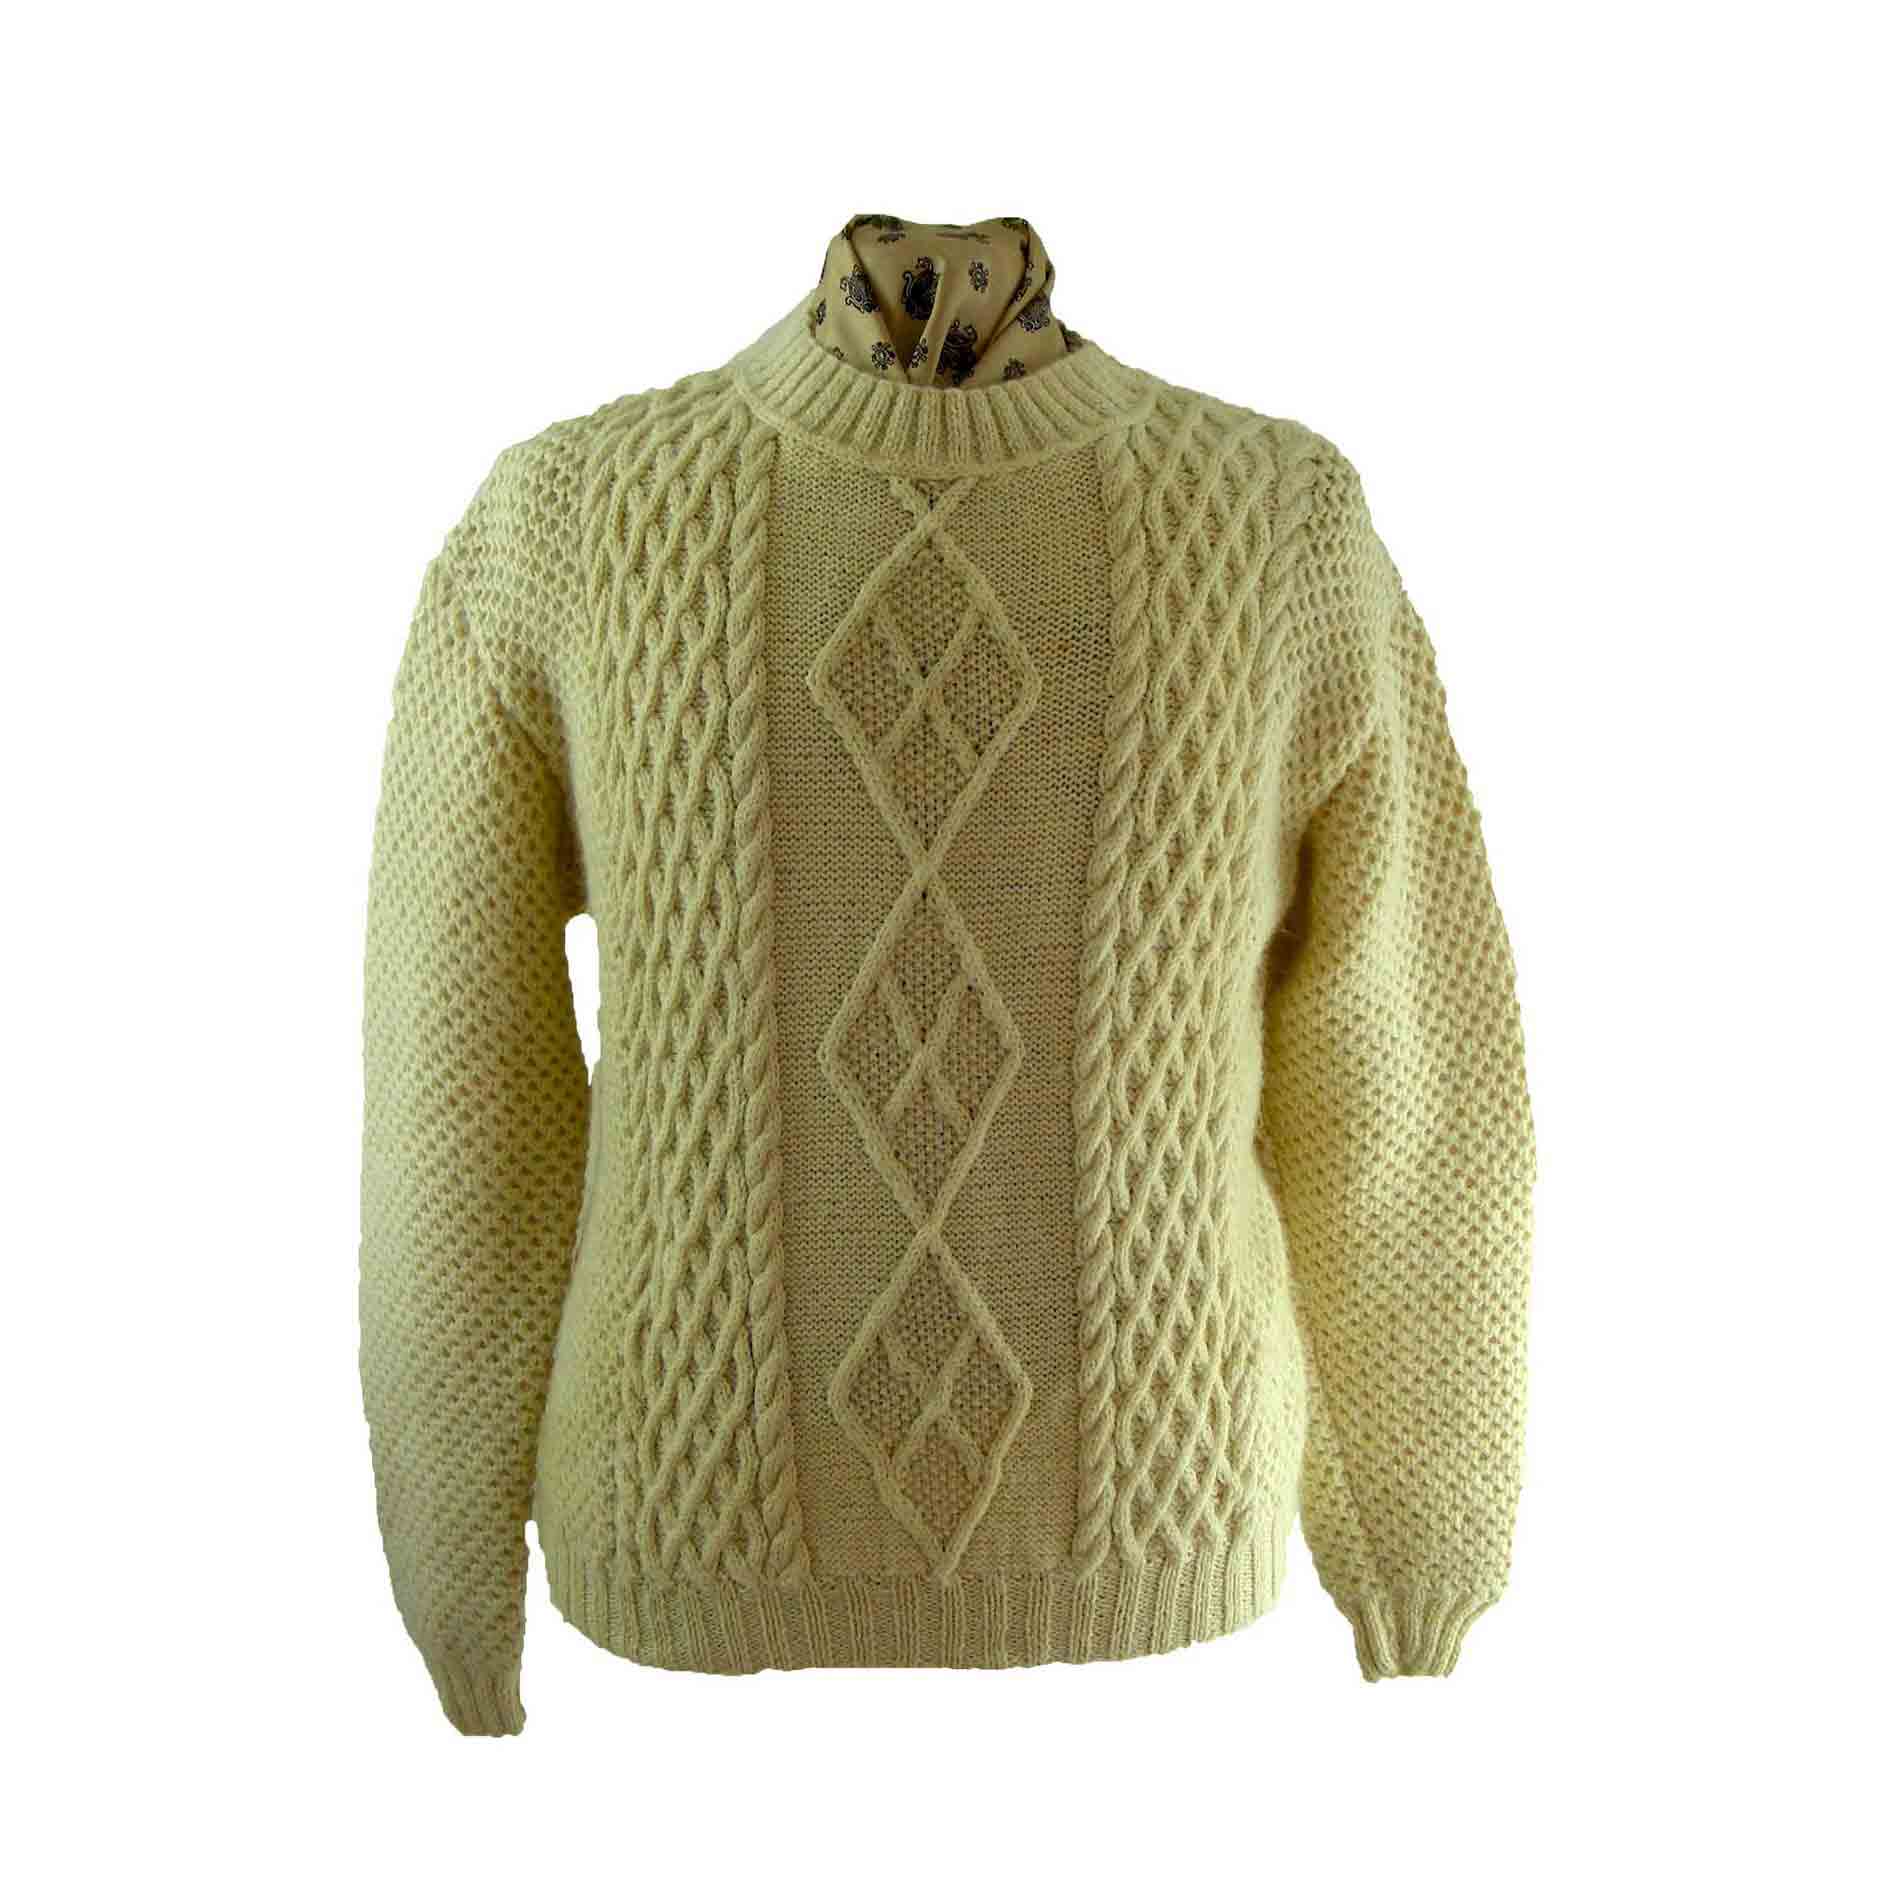 Mens cable knit sweater - Blue 17 Vintage Clothing